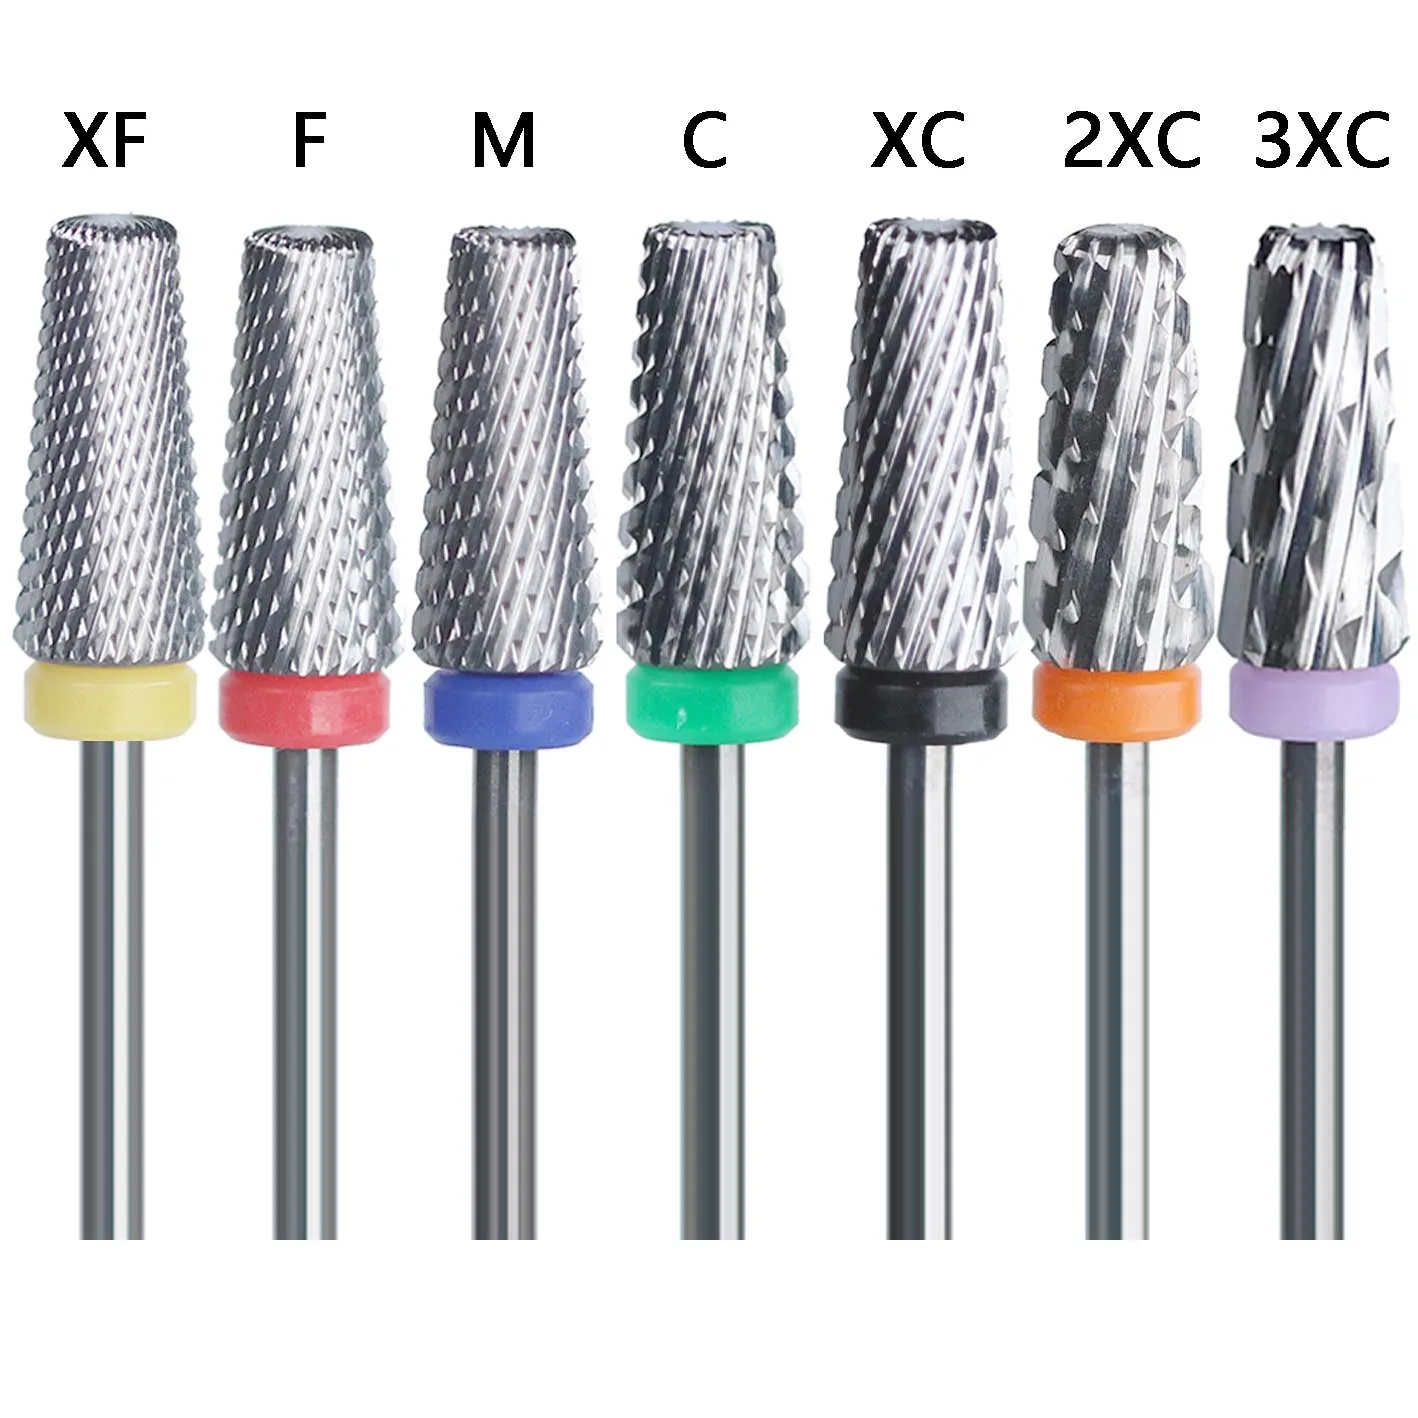 5PCS/Bag 5 IN 1 Cutter Manicure Nail Drill Bits Electric Nail Files Grinding Bits Mills Cutter Burr Accessories